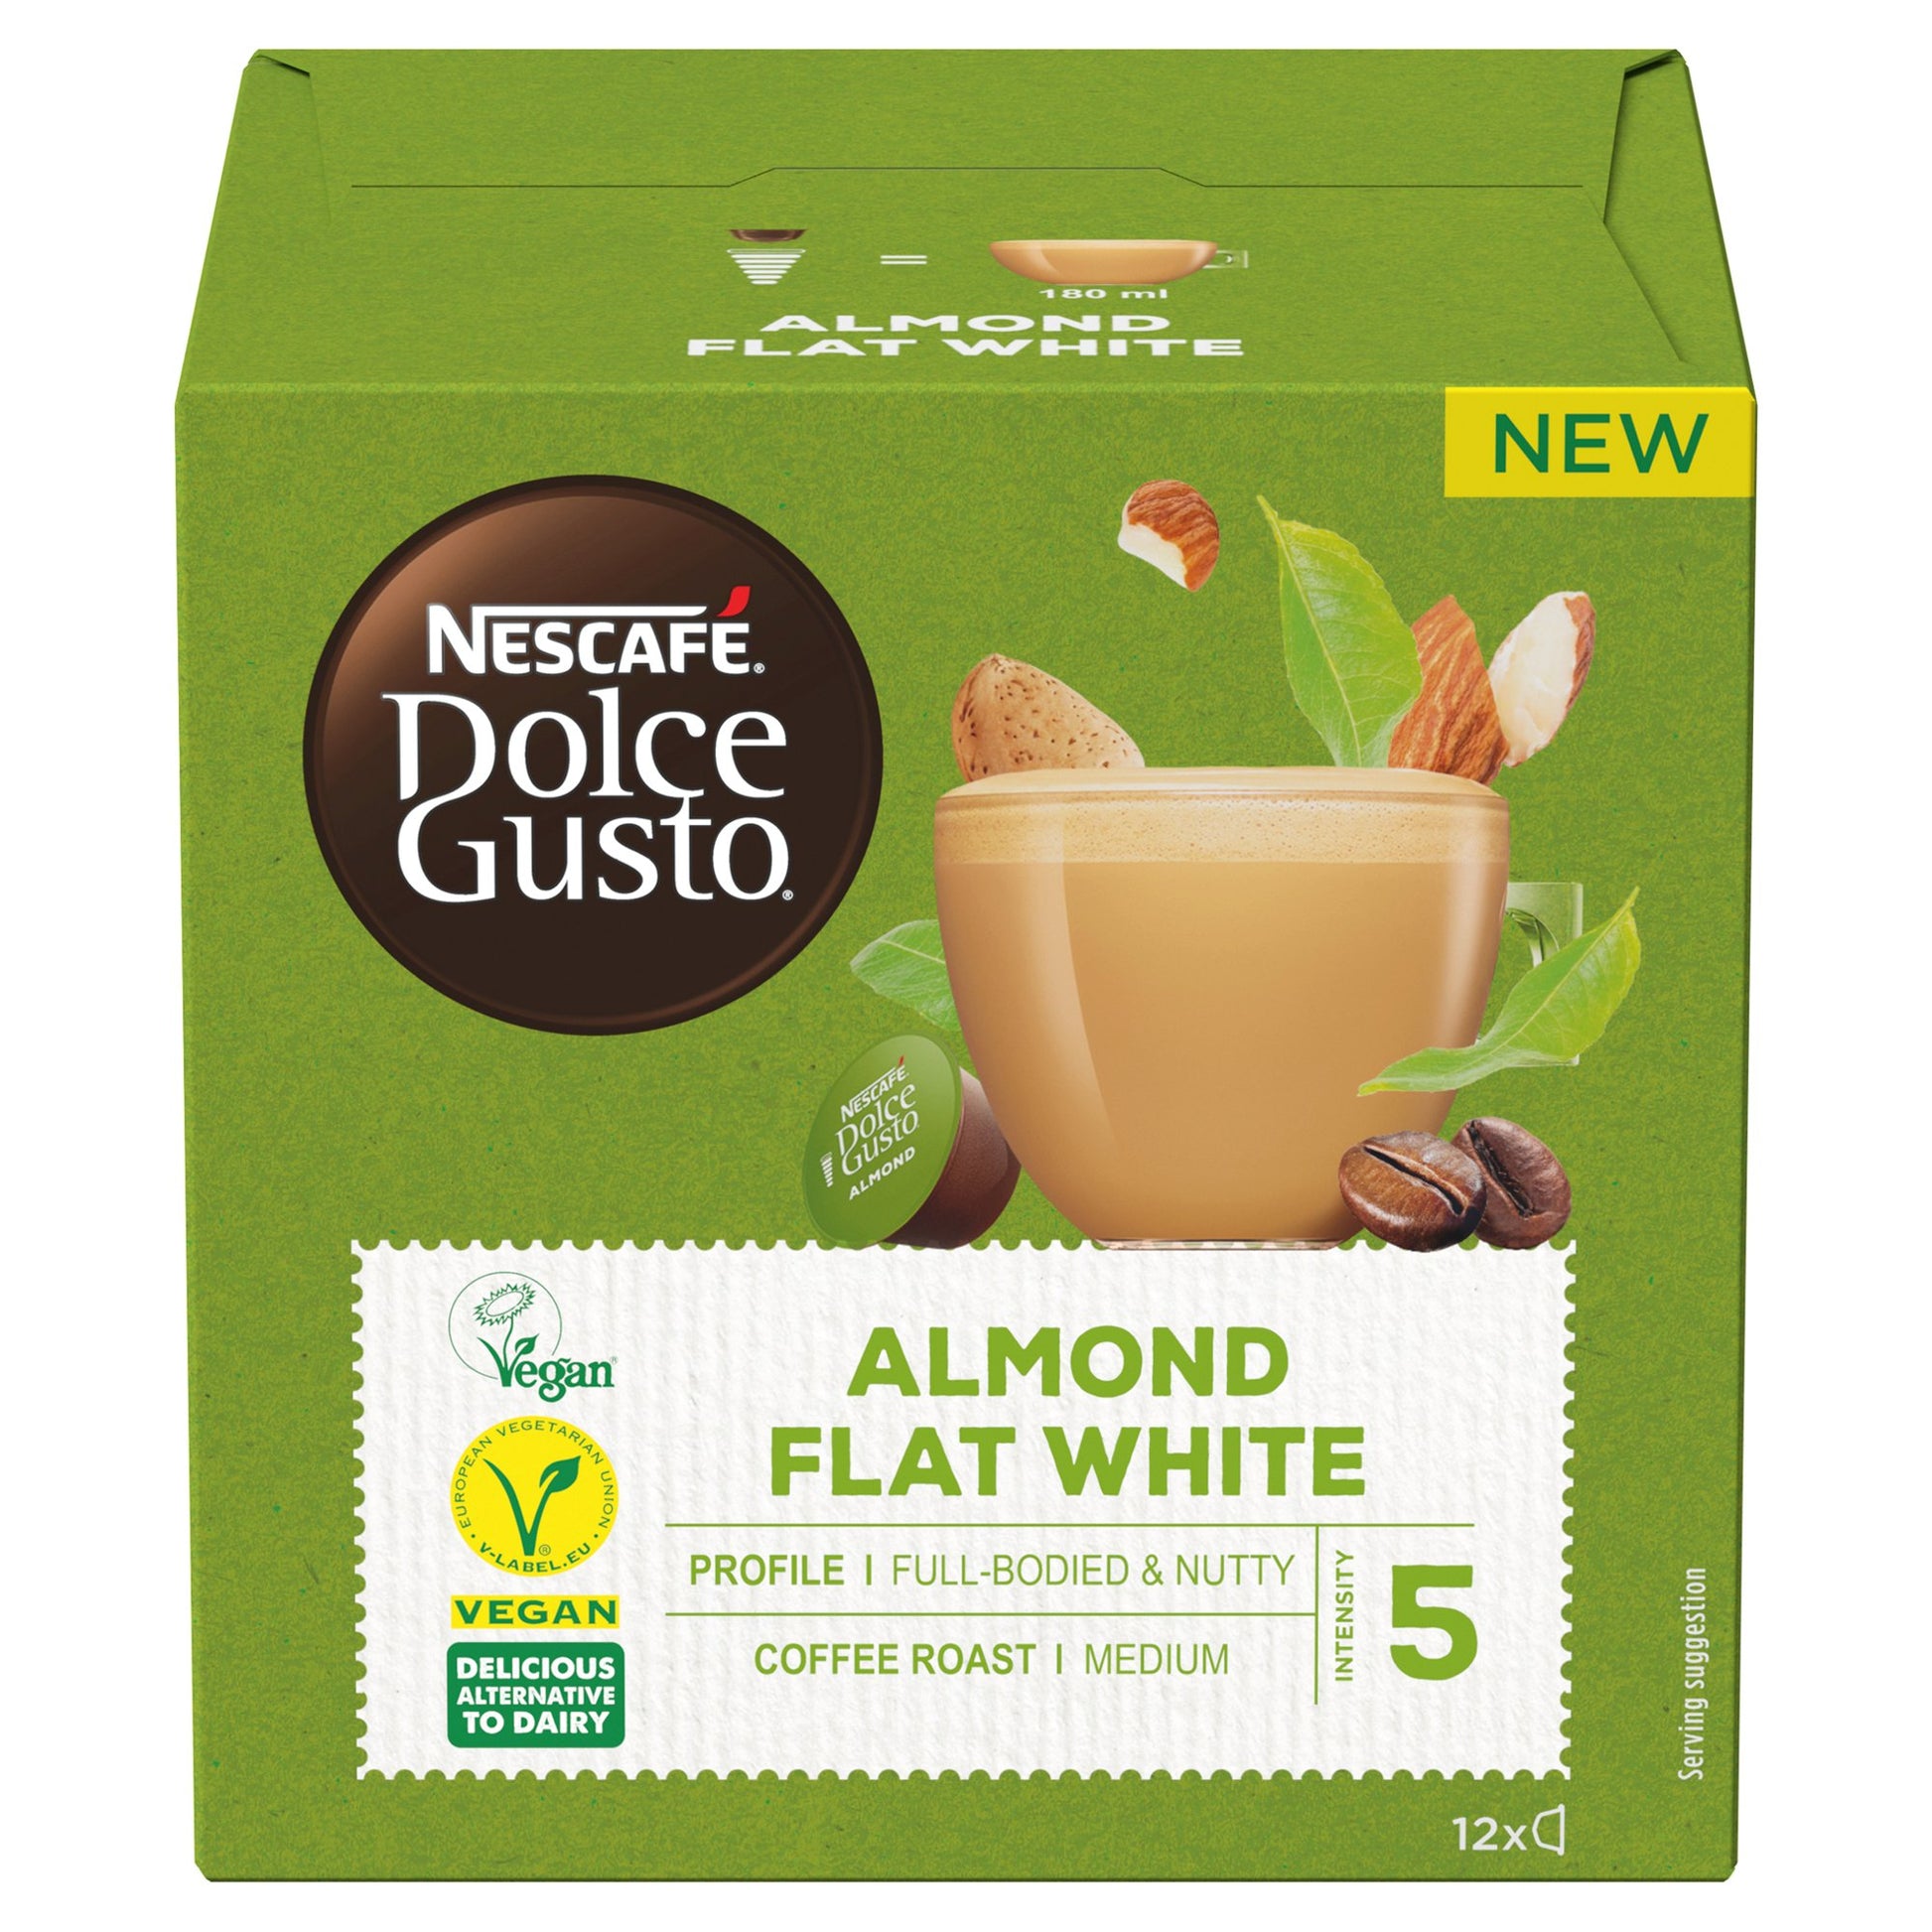 Dolce Gusto Almond Flat White 12's - NWT FM SOLUTIONS - YOUR CATERING WHOLESALER